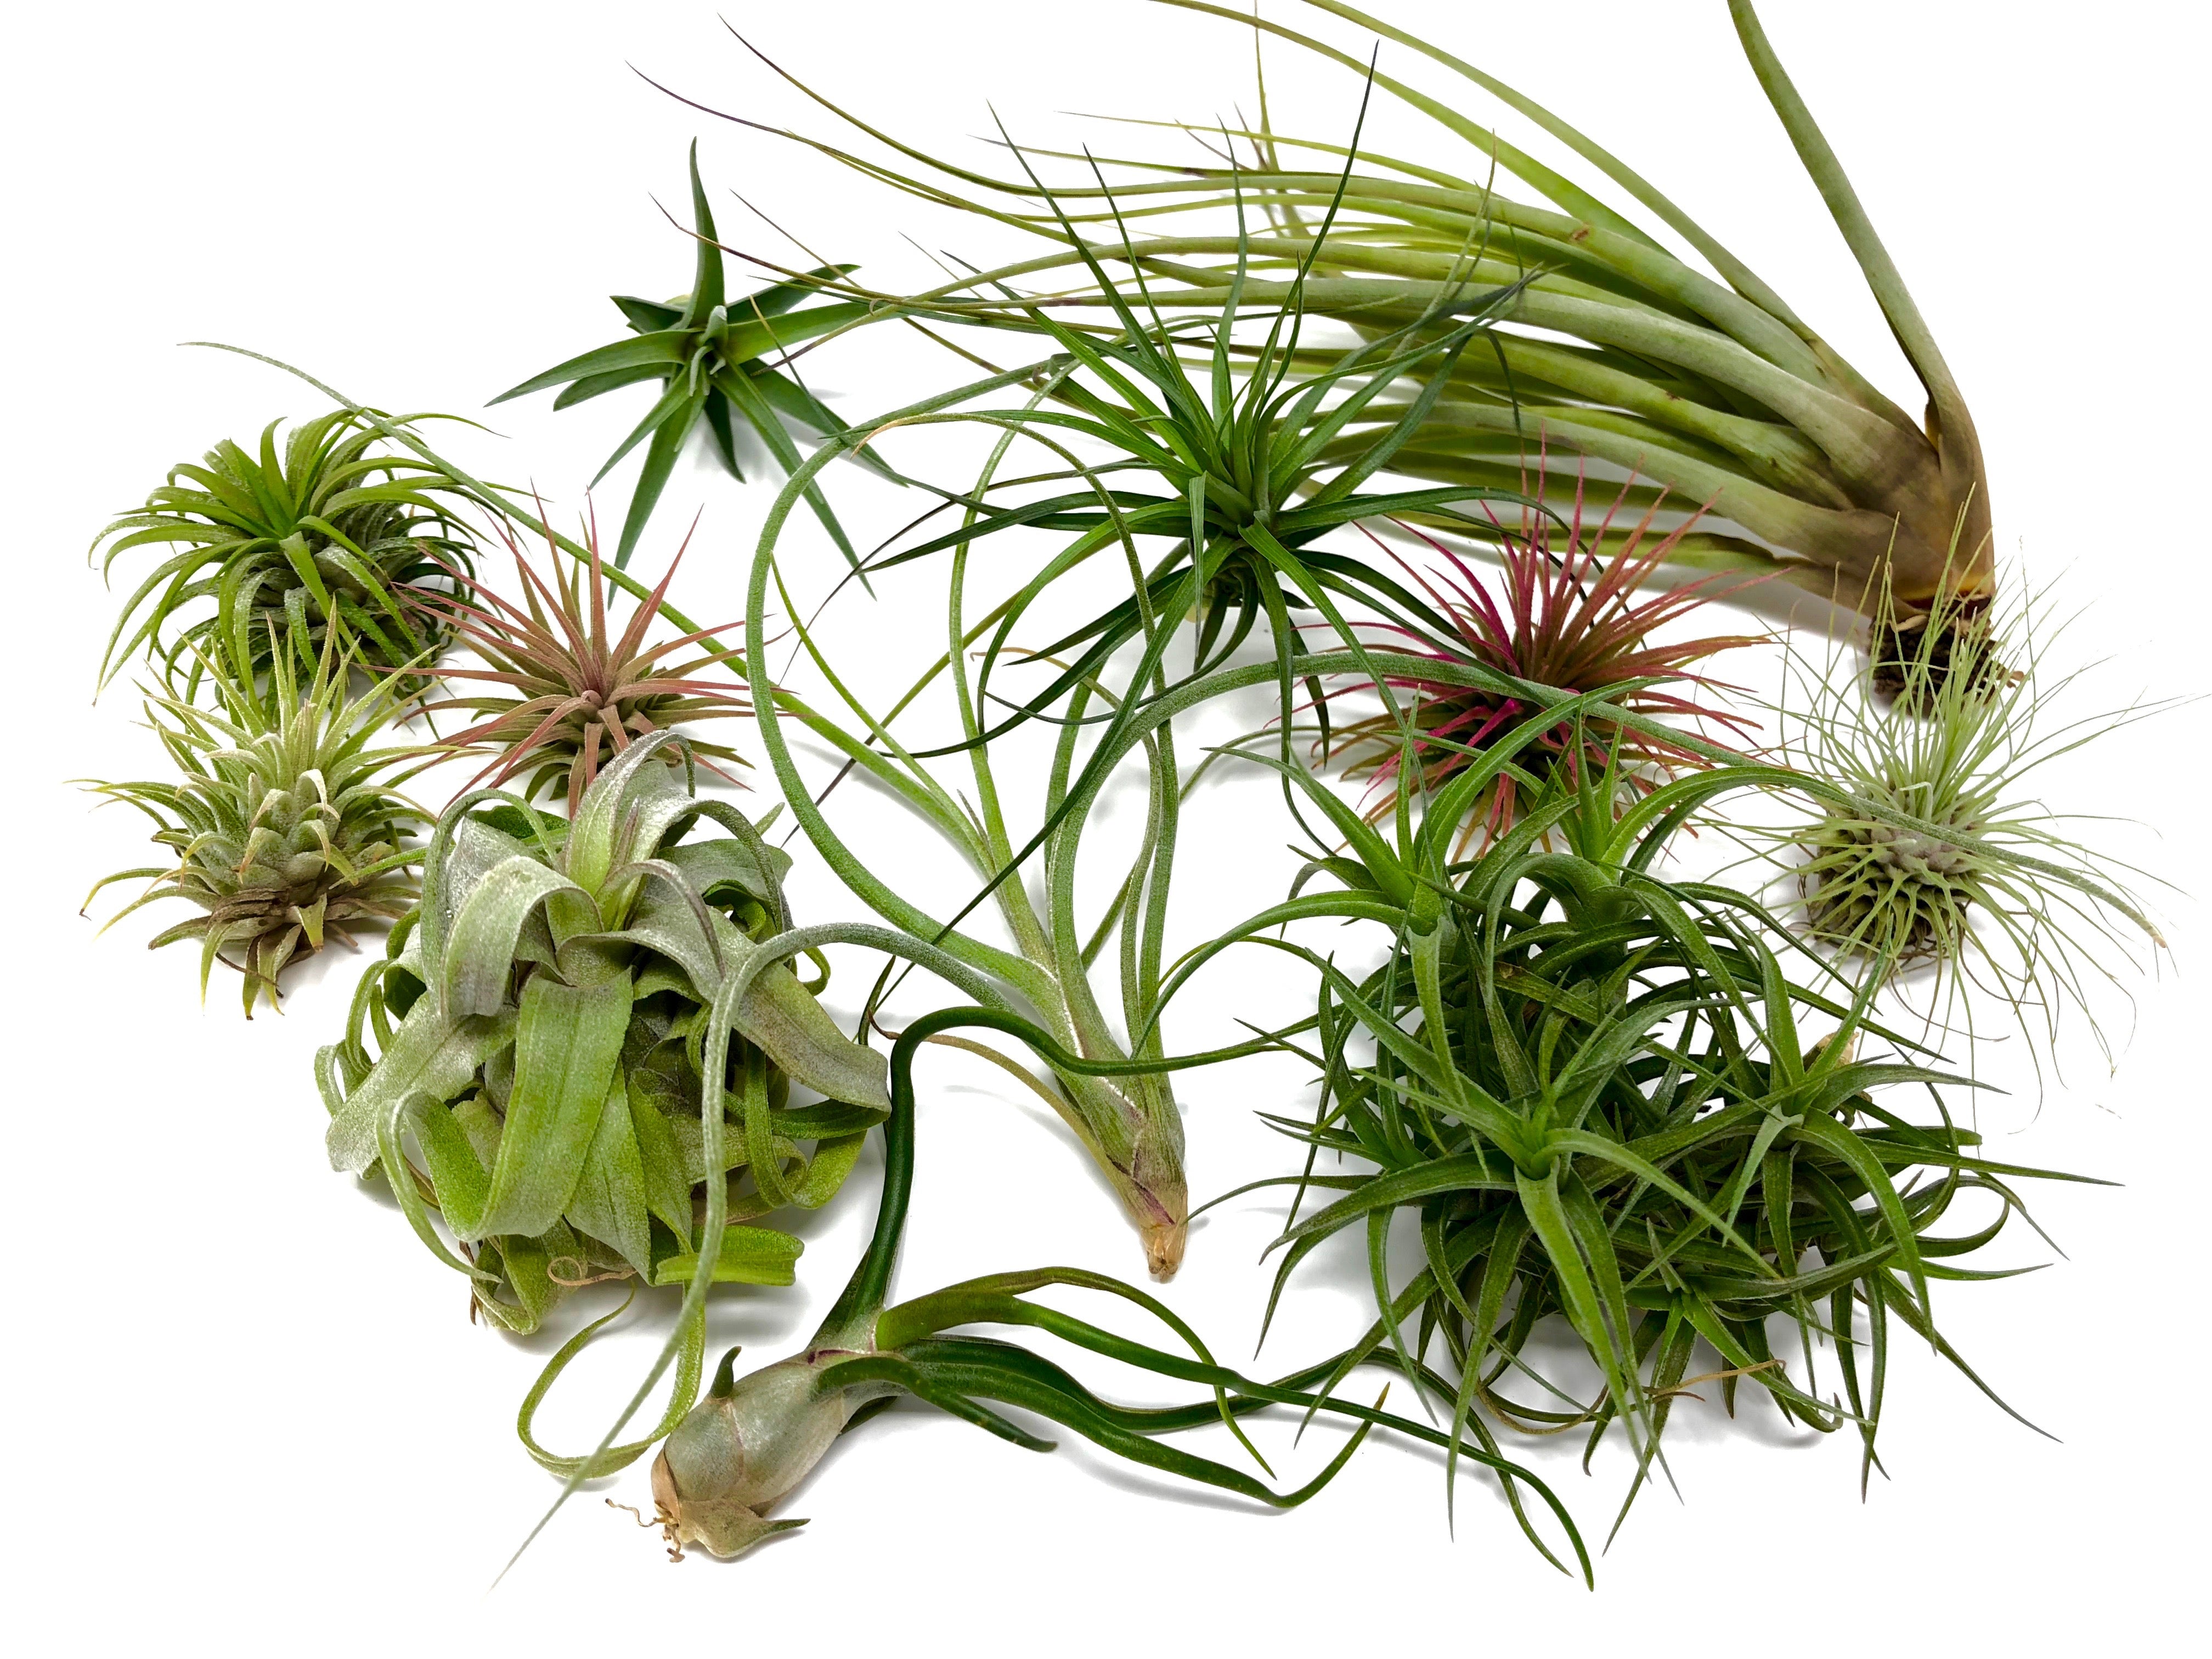 Beautiful colorful air plant tillandsia mix for sale displayed in a box